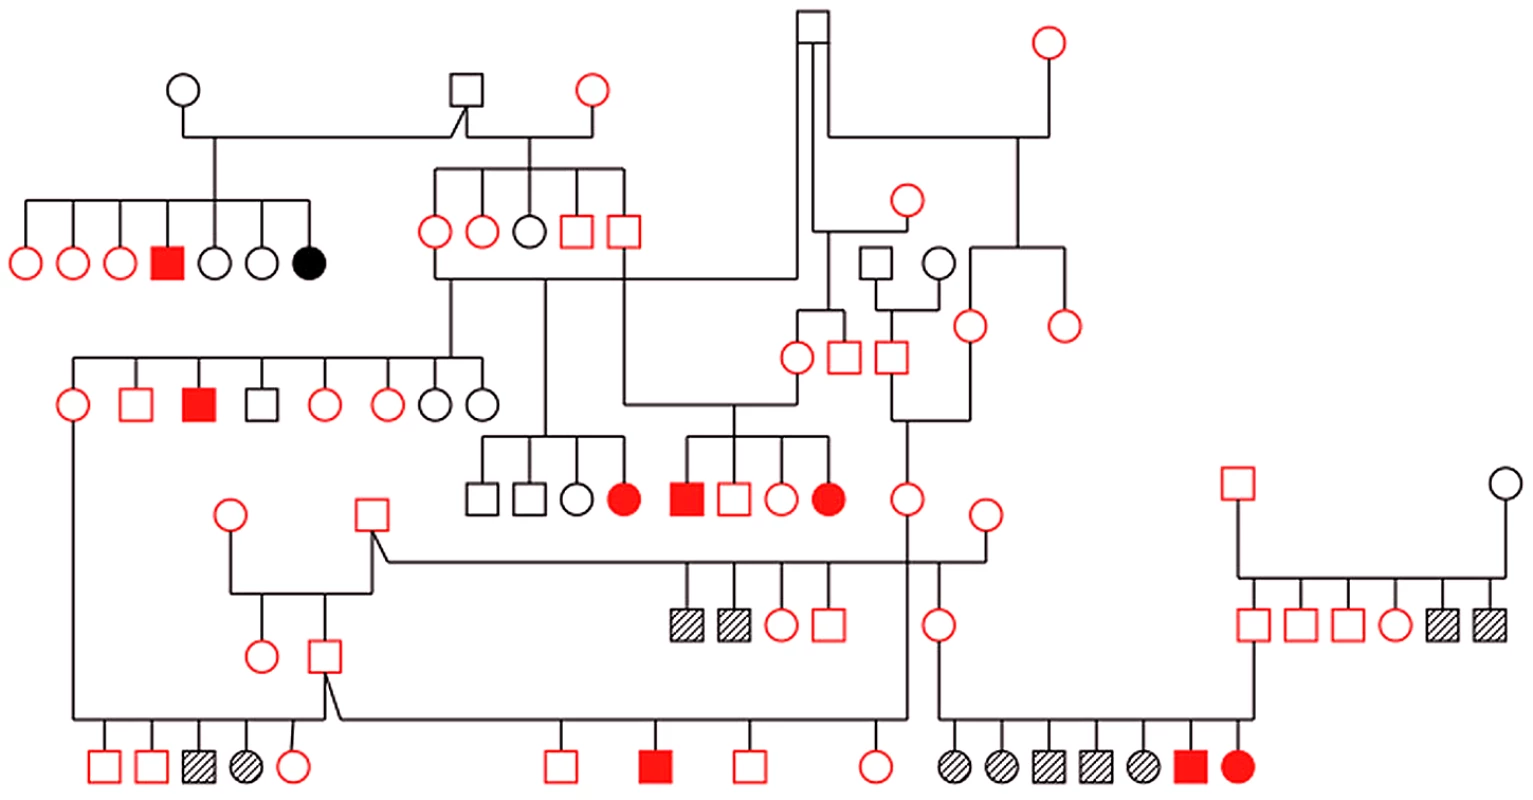 Pedigree of family of Old English Sheepdogs genotyped with microsatellite markers for linkage analysis.